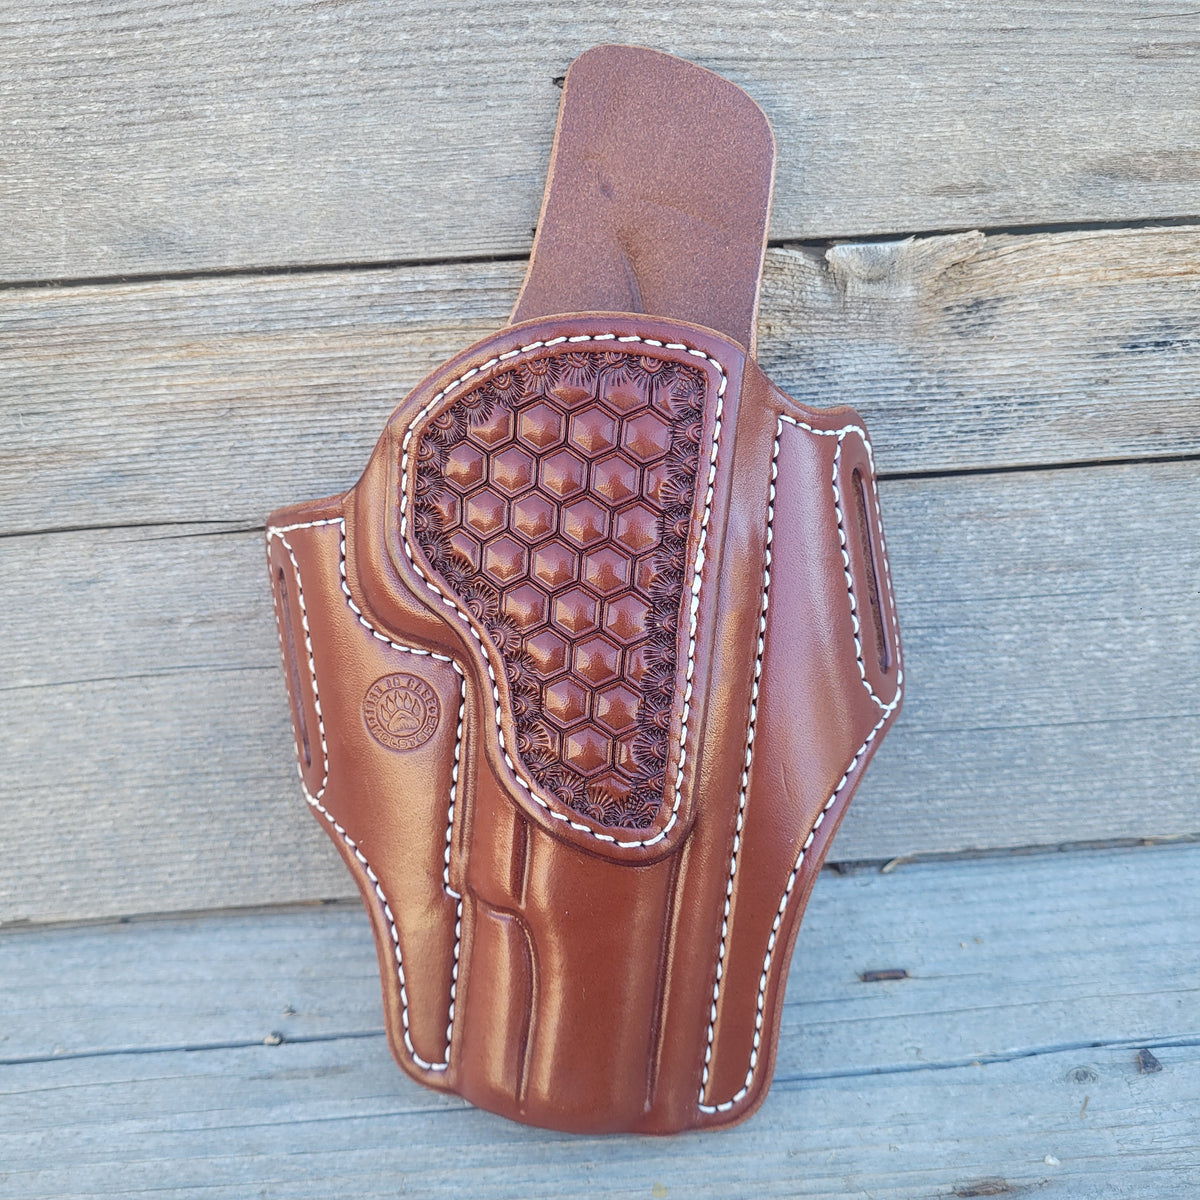 5" 1911 Classic Holster All Brown, White Stitching, Hex stamp